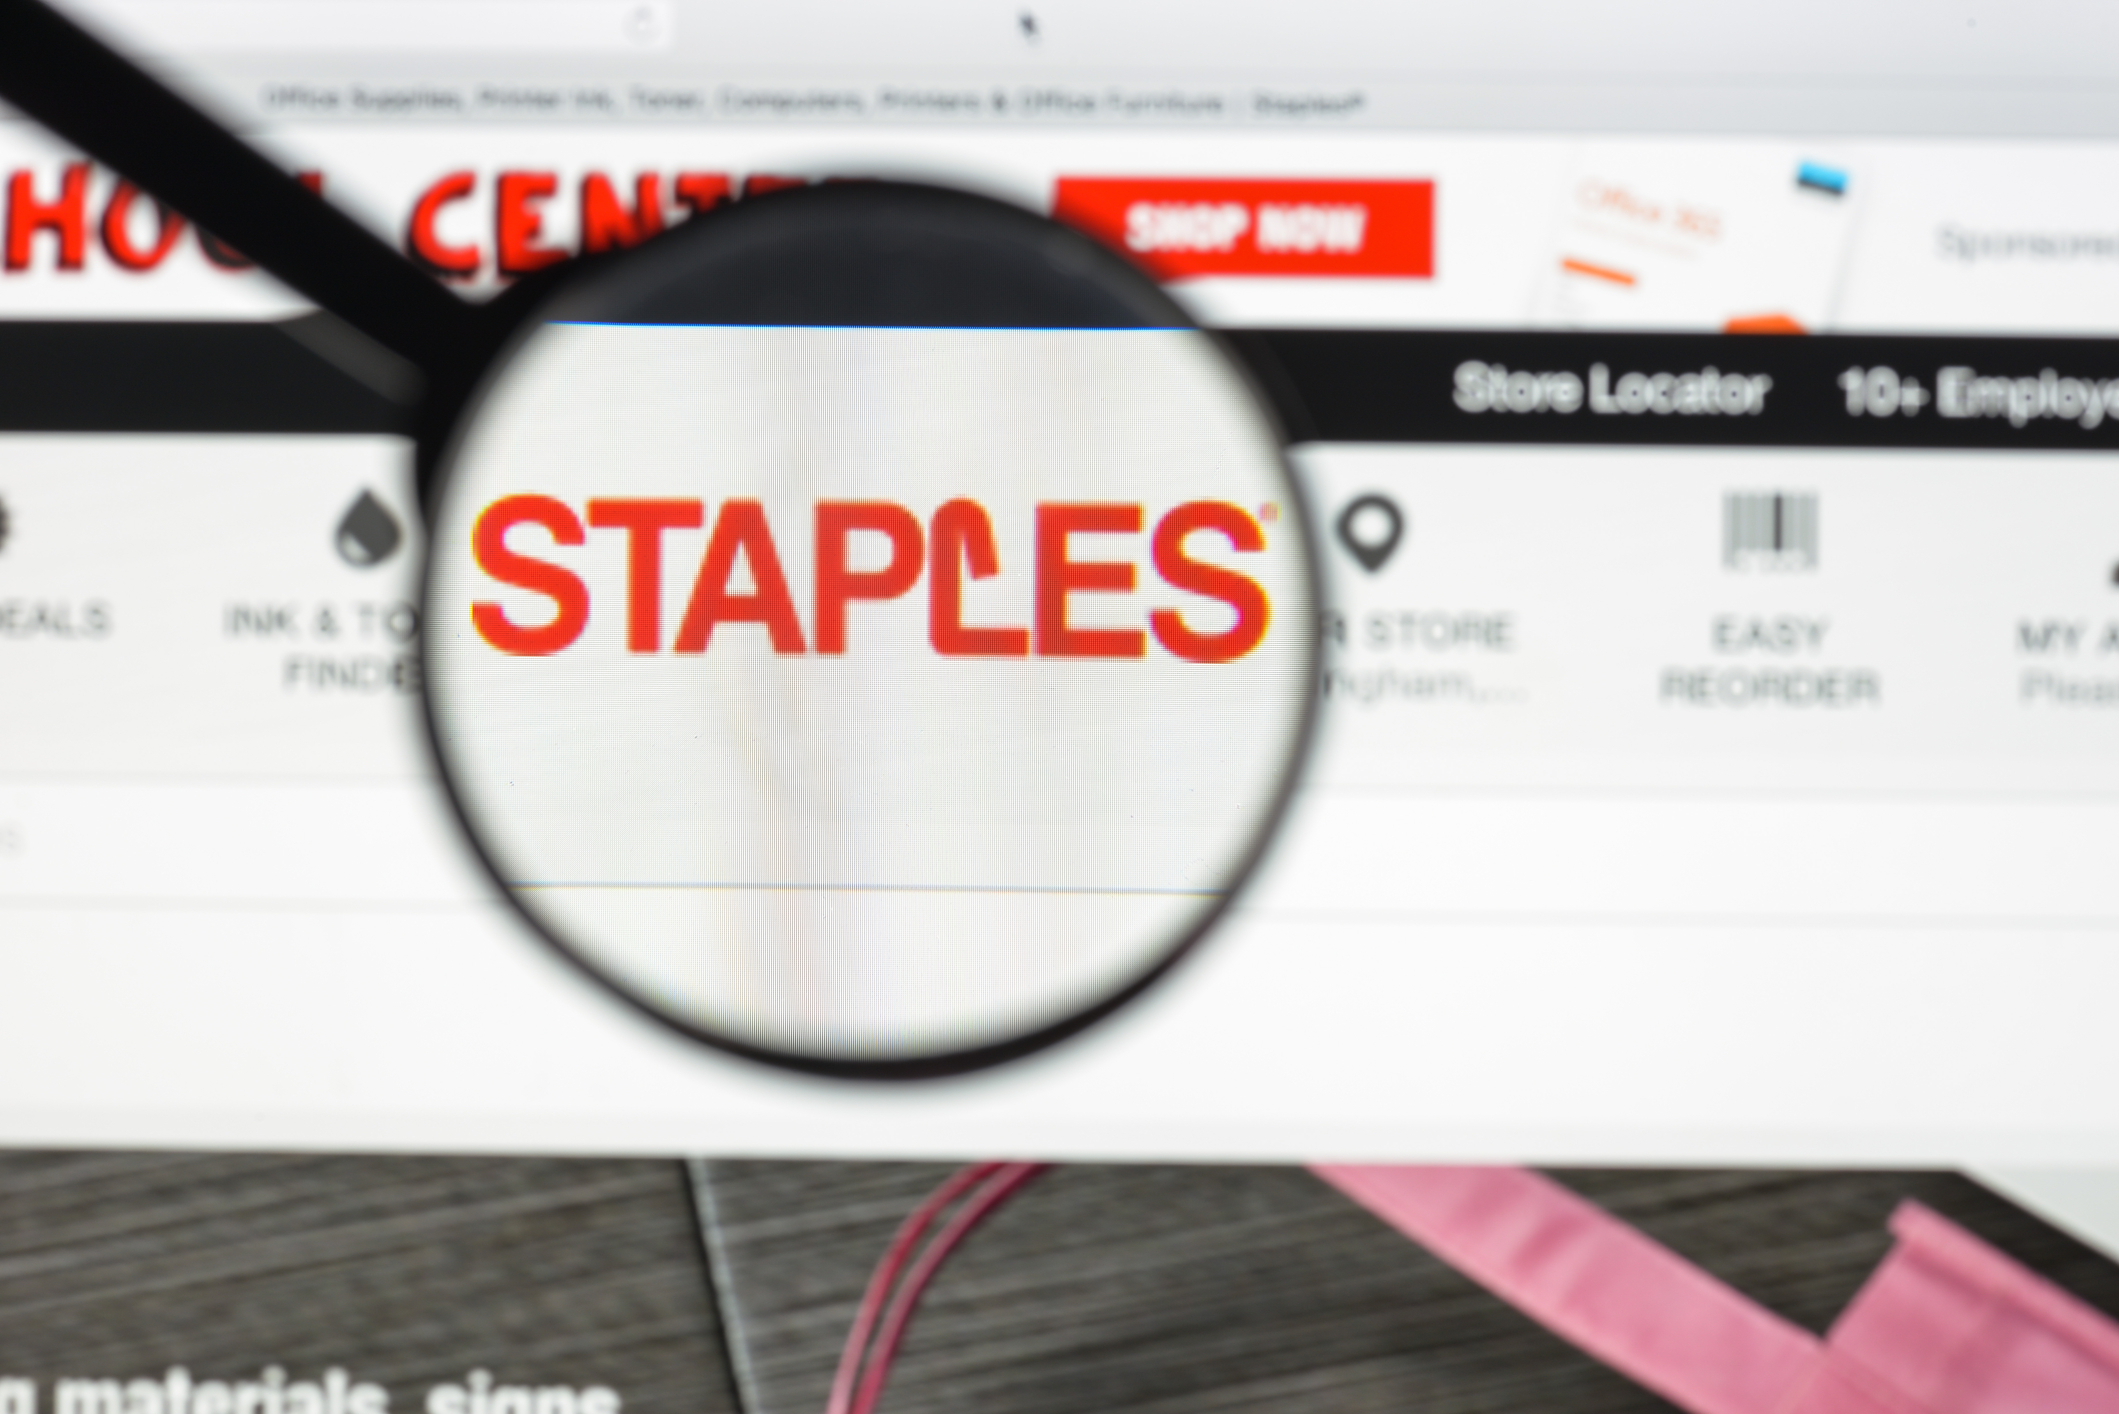 staples-coupon-save-20-on-your-online-order-of-100-or-more-clark-deals